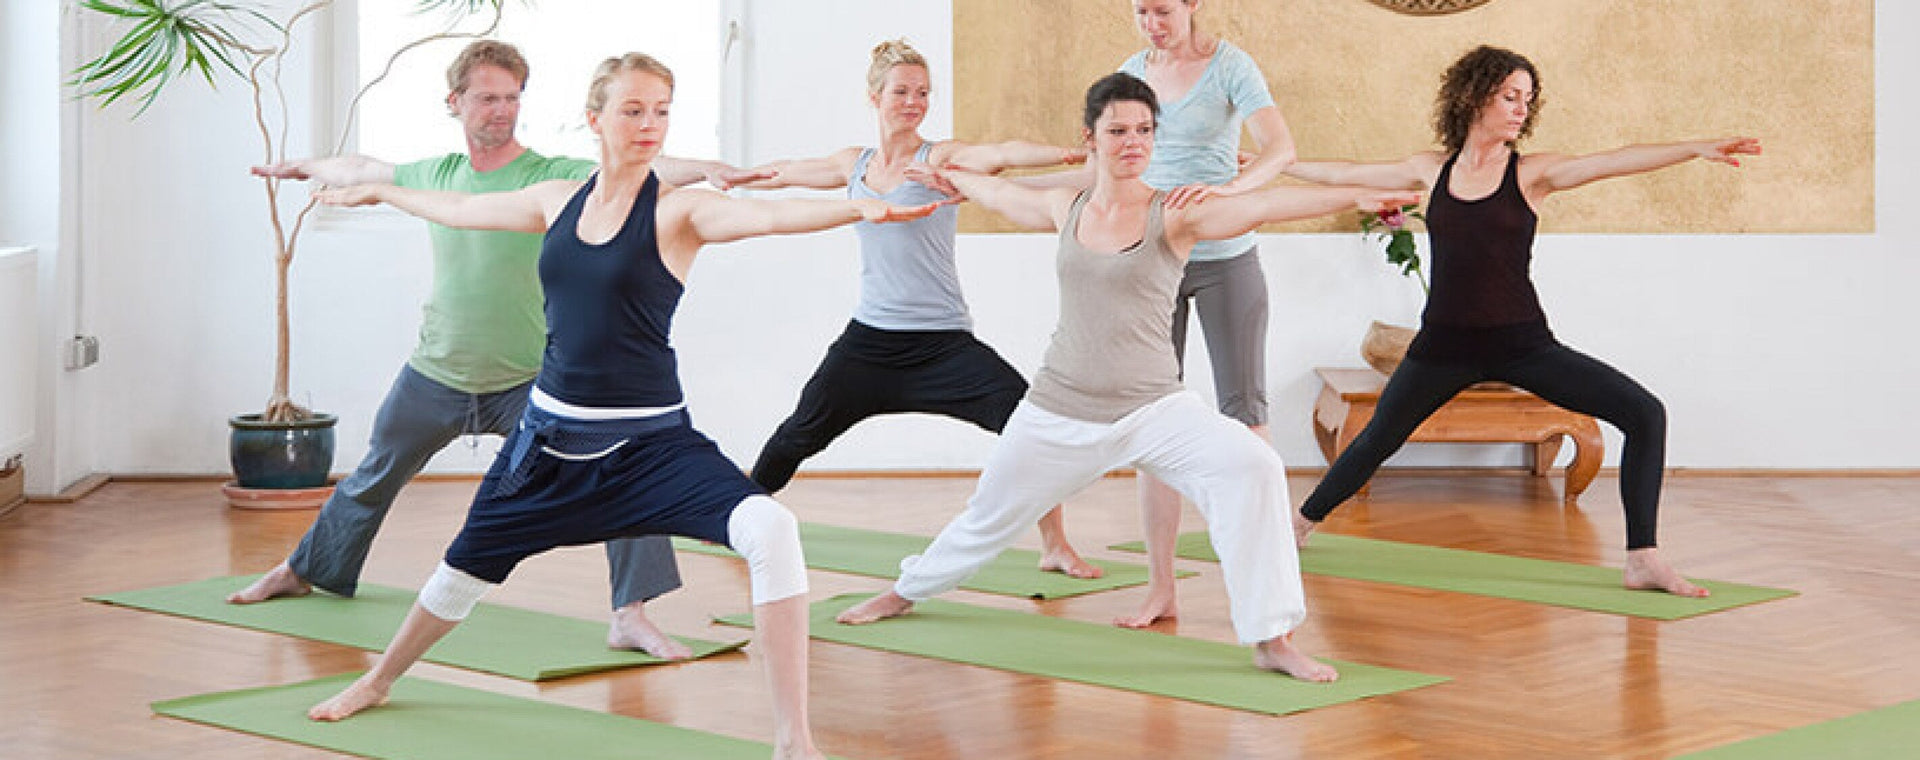 ACE - ProSource™: January 2014 - Yoga and the Art of Hands-on Adjustments